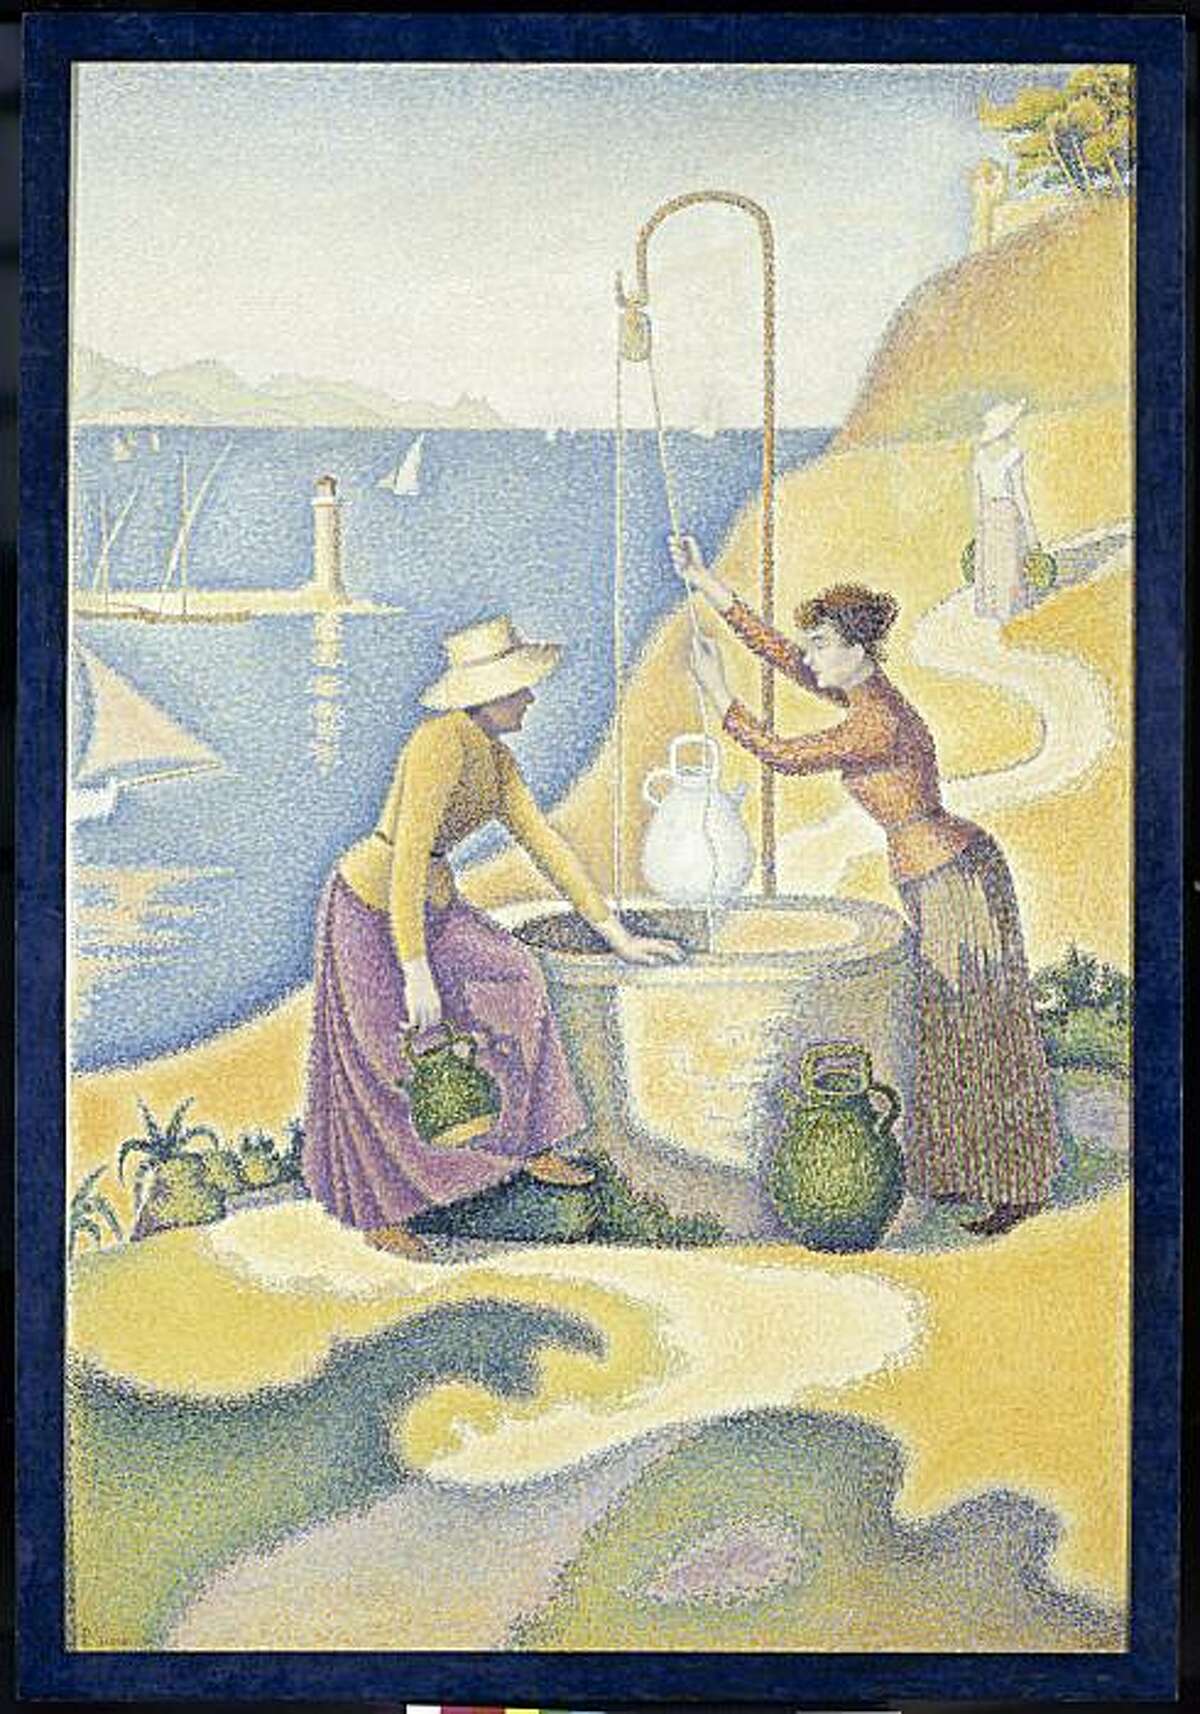 "Women at the Well" (1892) oil on canvas by Paul Signac